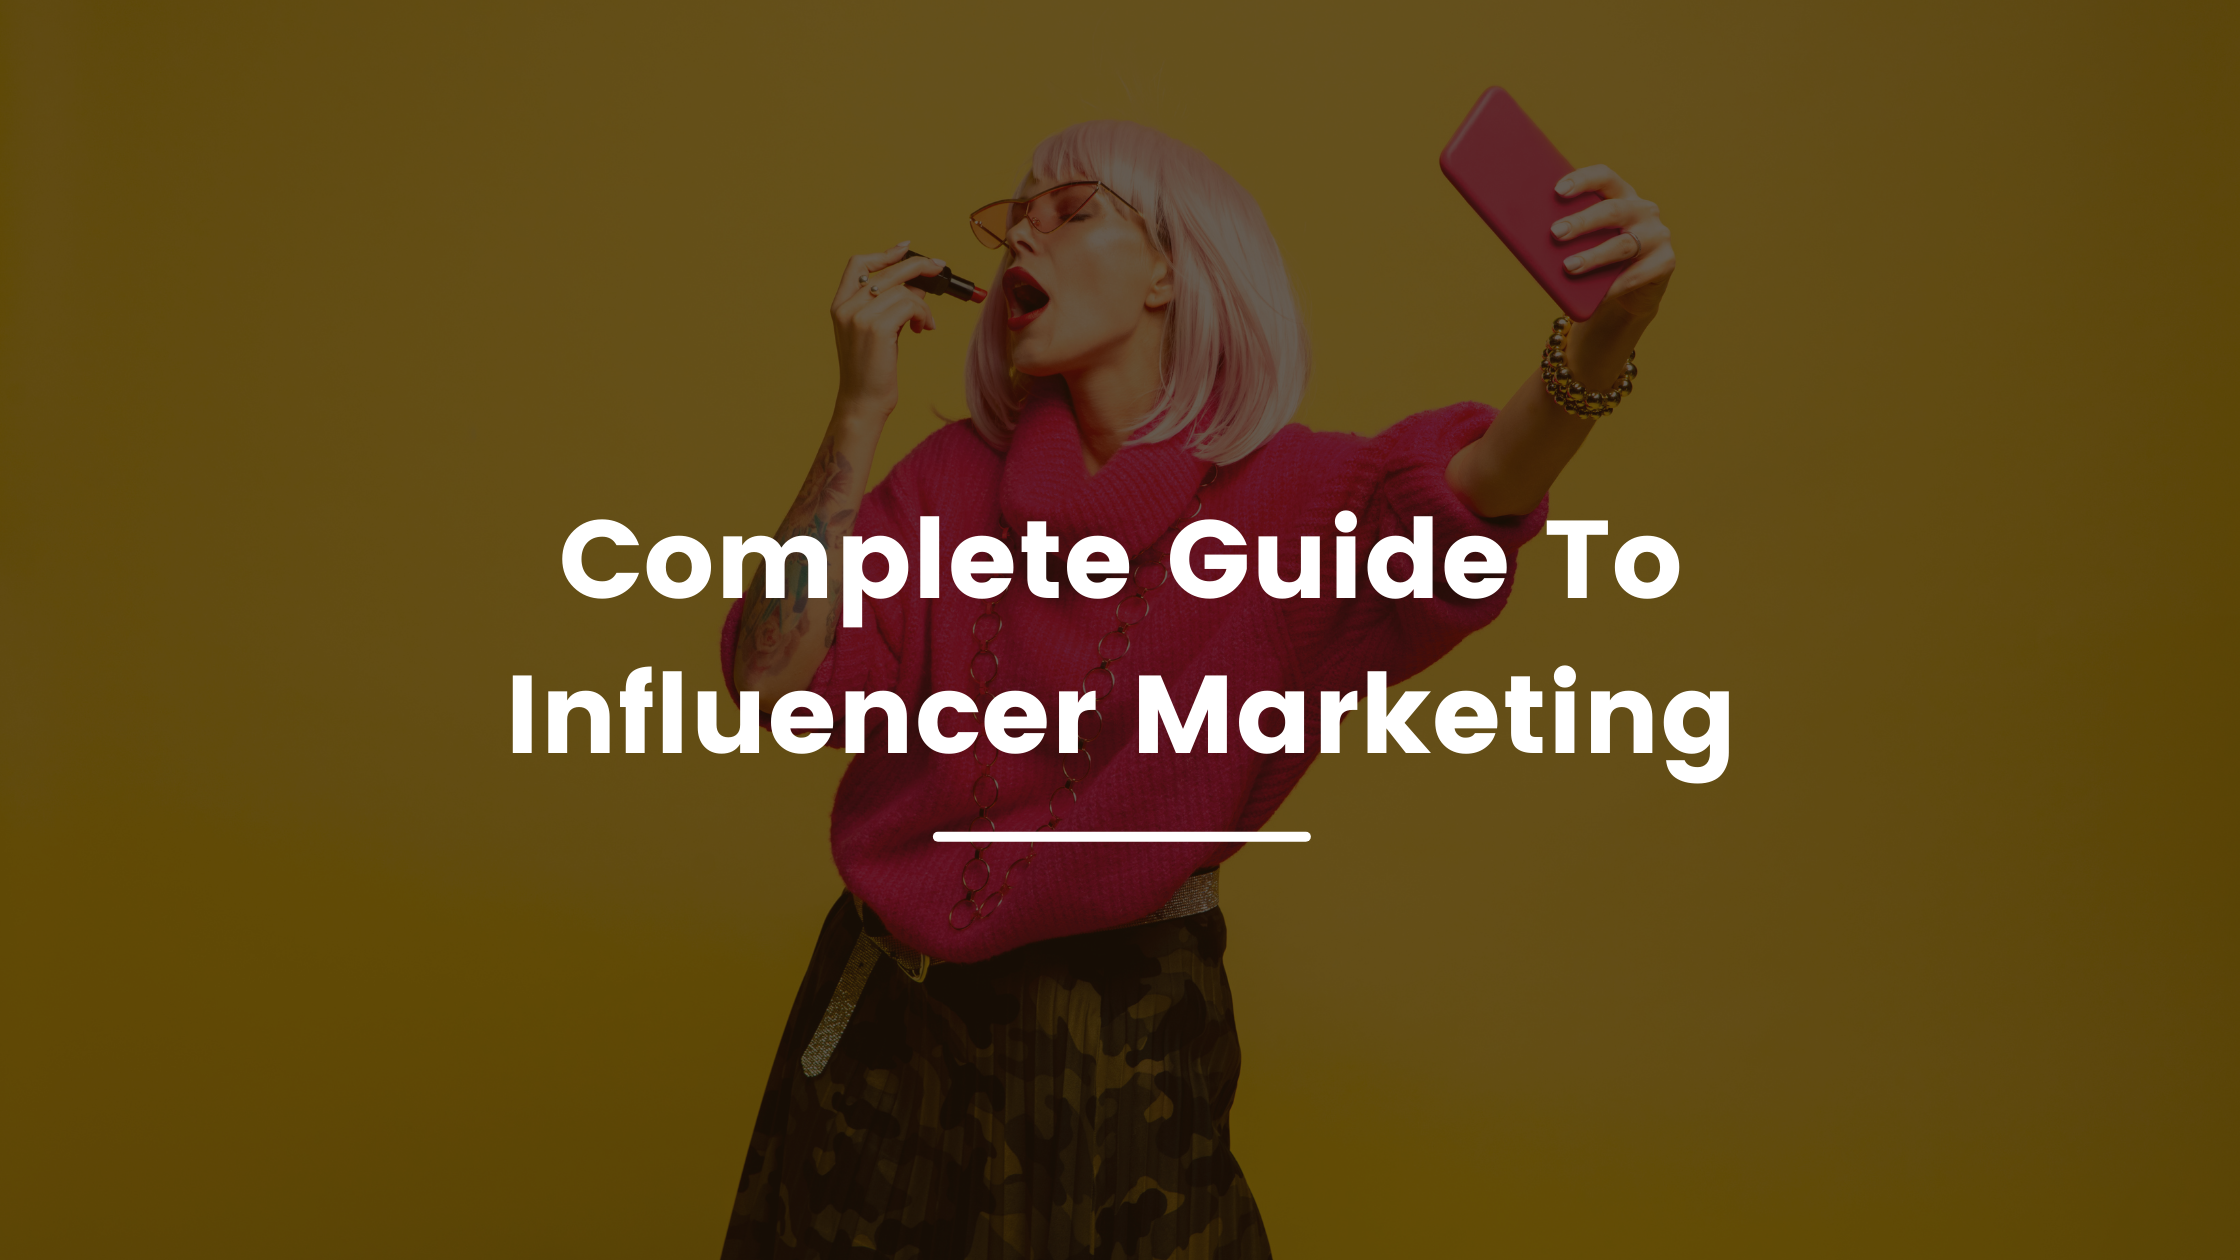 <div>Complete & Detailed Guide to Influencer Marketing | Introduction To Influencer Marketing</div>